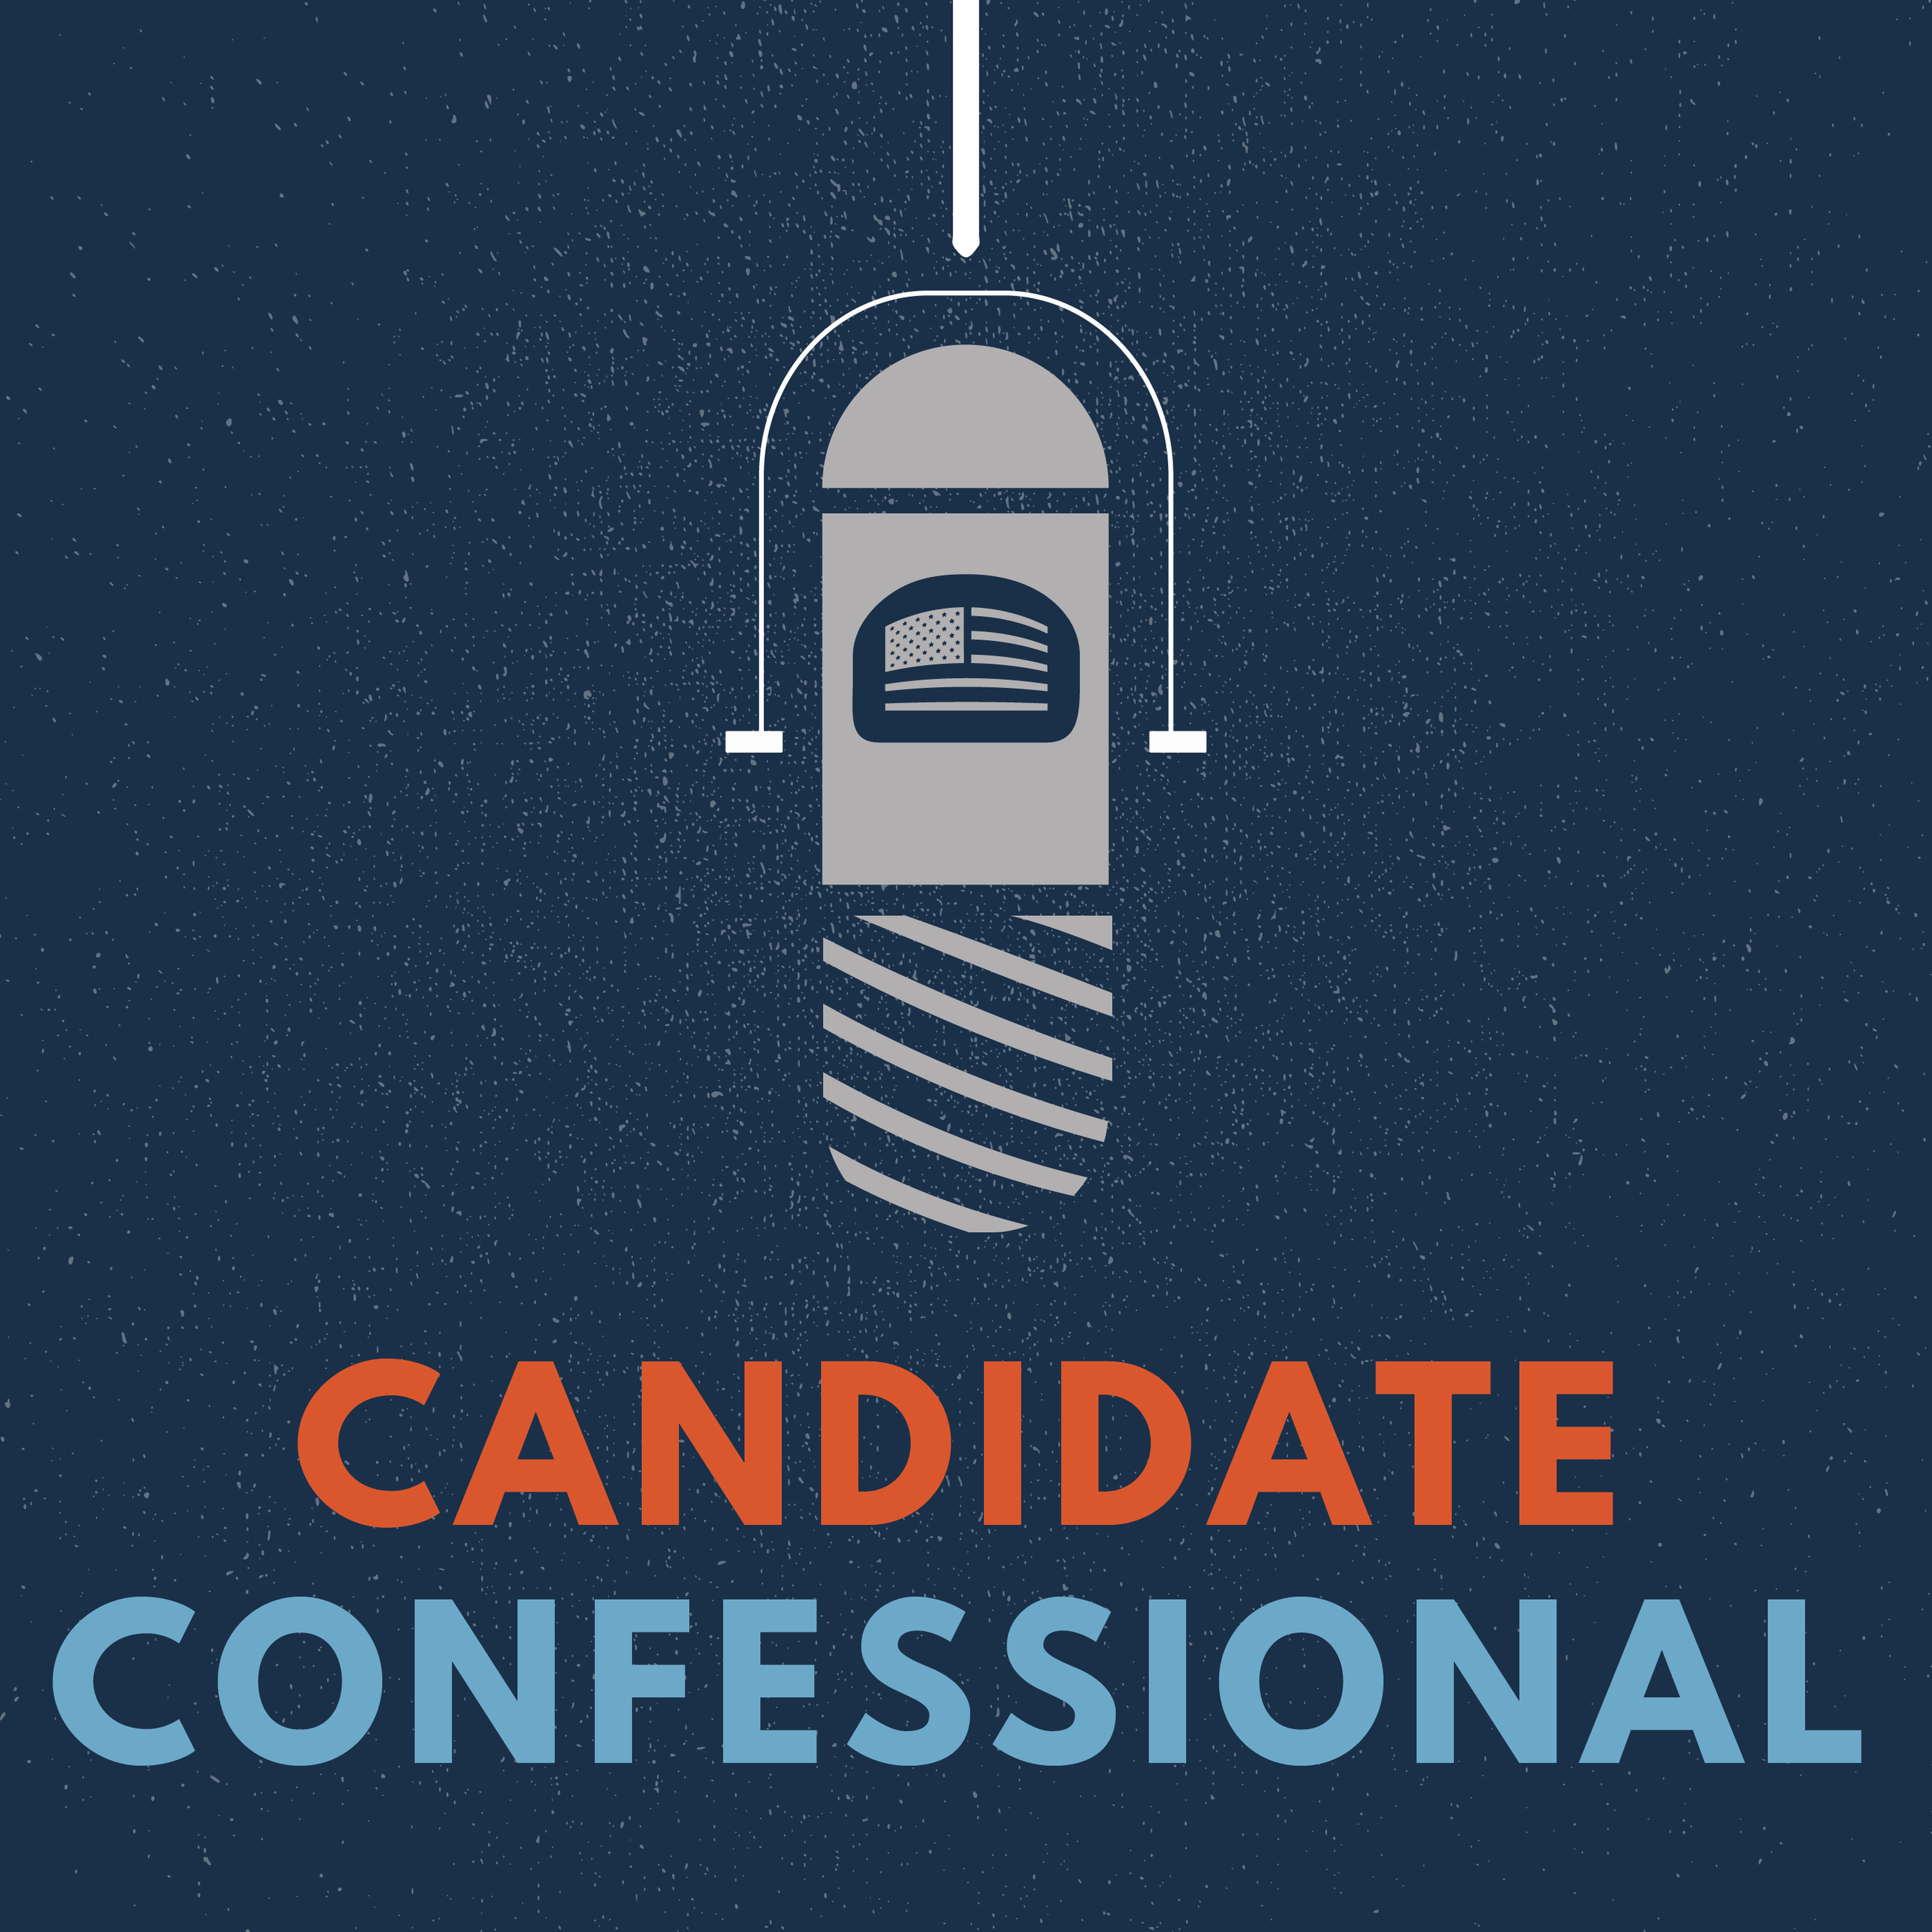 Coming Soon: Candidate Confessional Season 2